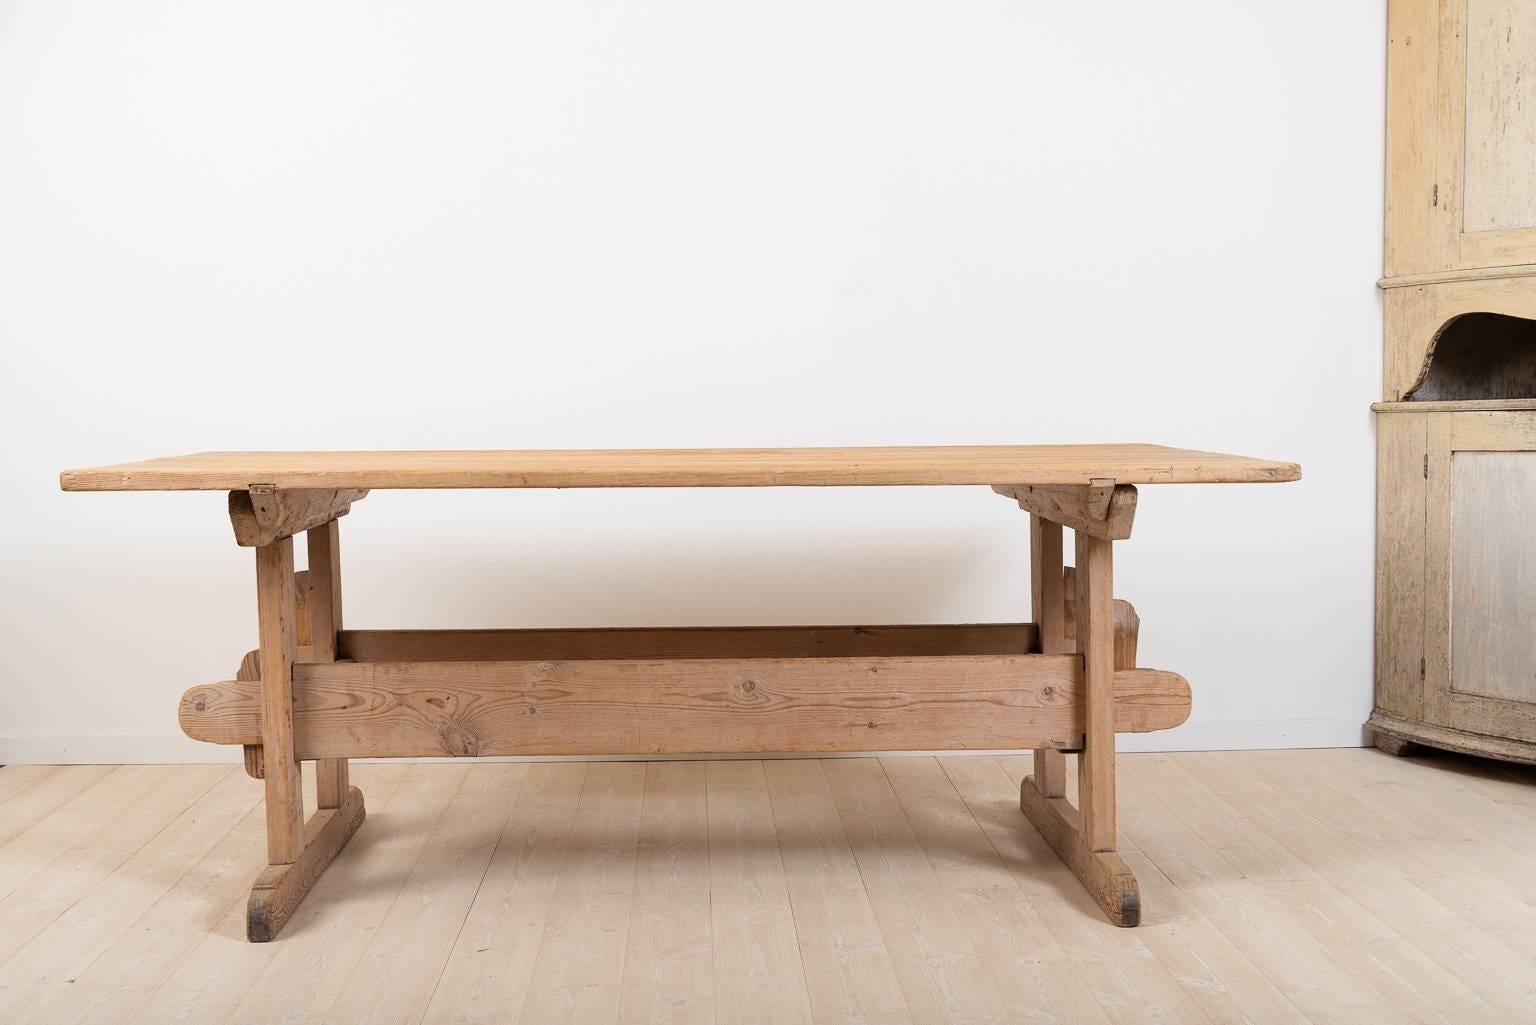 Trestle table from northern Sweden manufactured circa 1810. The table is in good condition and is complete. All parts are original to the table, even the four wedges are originals from the early 1800s; the condition is very good with whole and